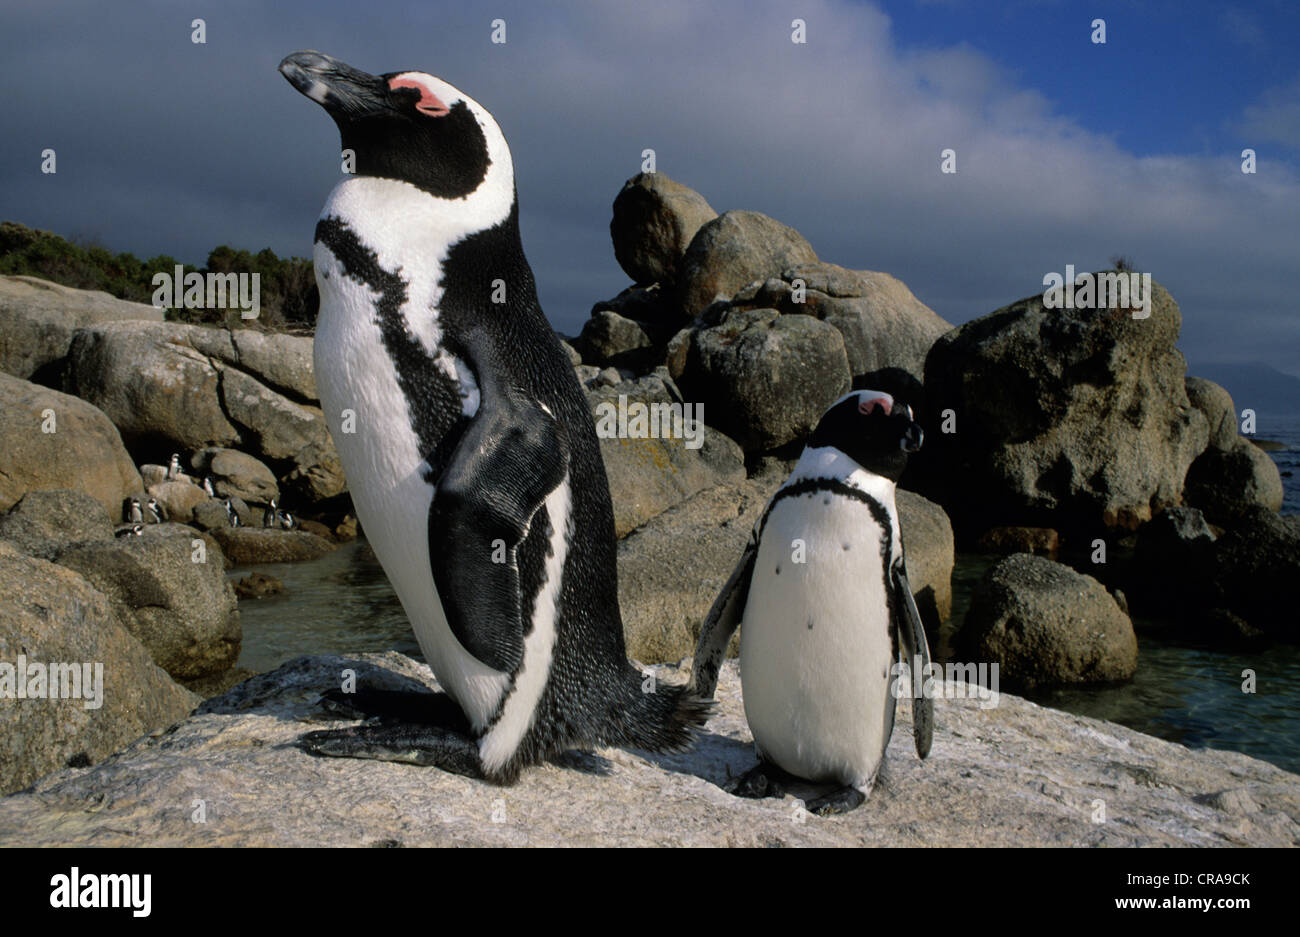 African Penguin (Spheniscus demersus), endangered species, Boulders Beach, Simon's Town Town, South Africa, Africa Stock Photo